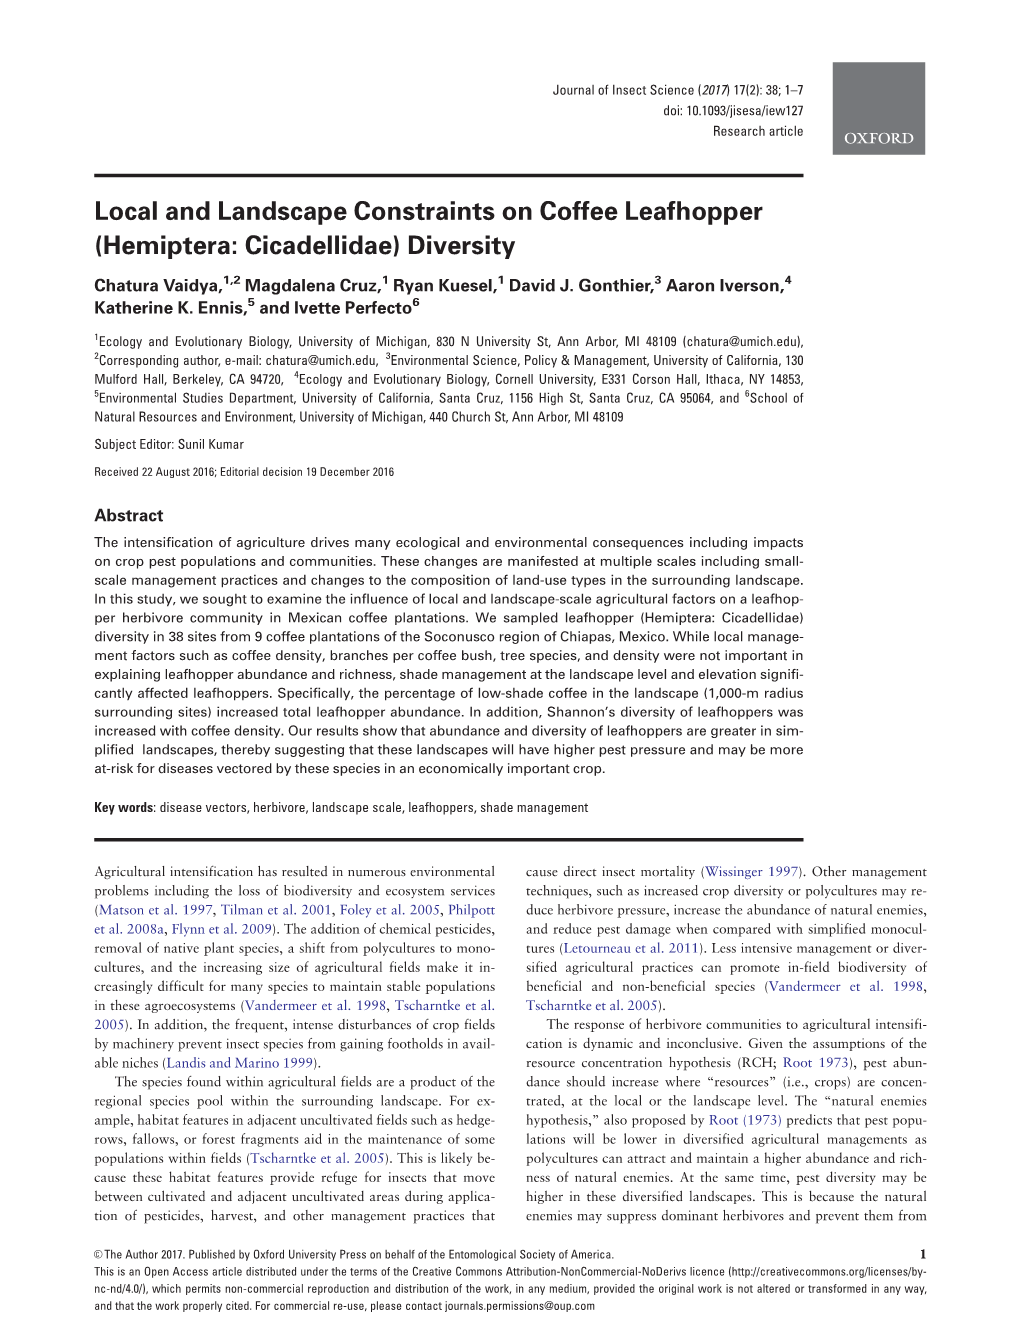 Local and Landscape Constraints on Coffee Leafhopper (Hemiptera: Cicadellidae) Diversity